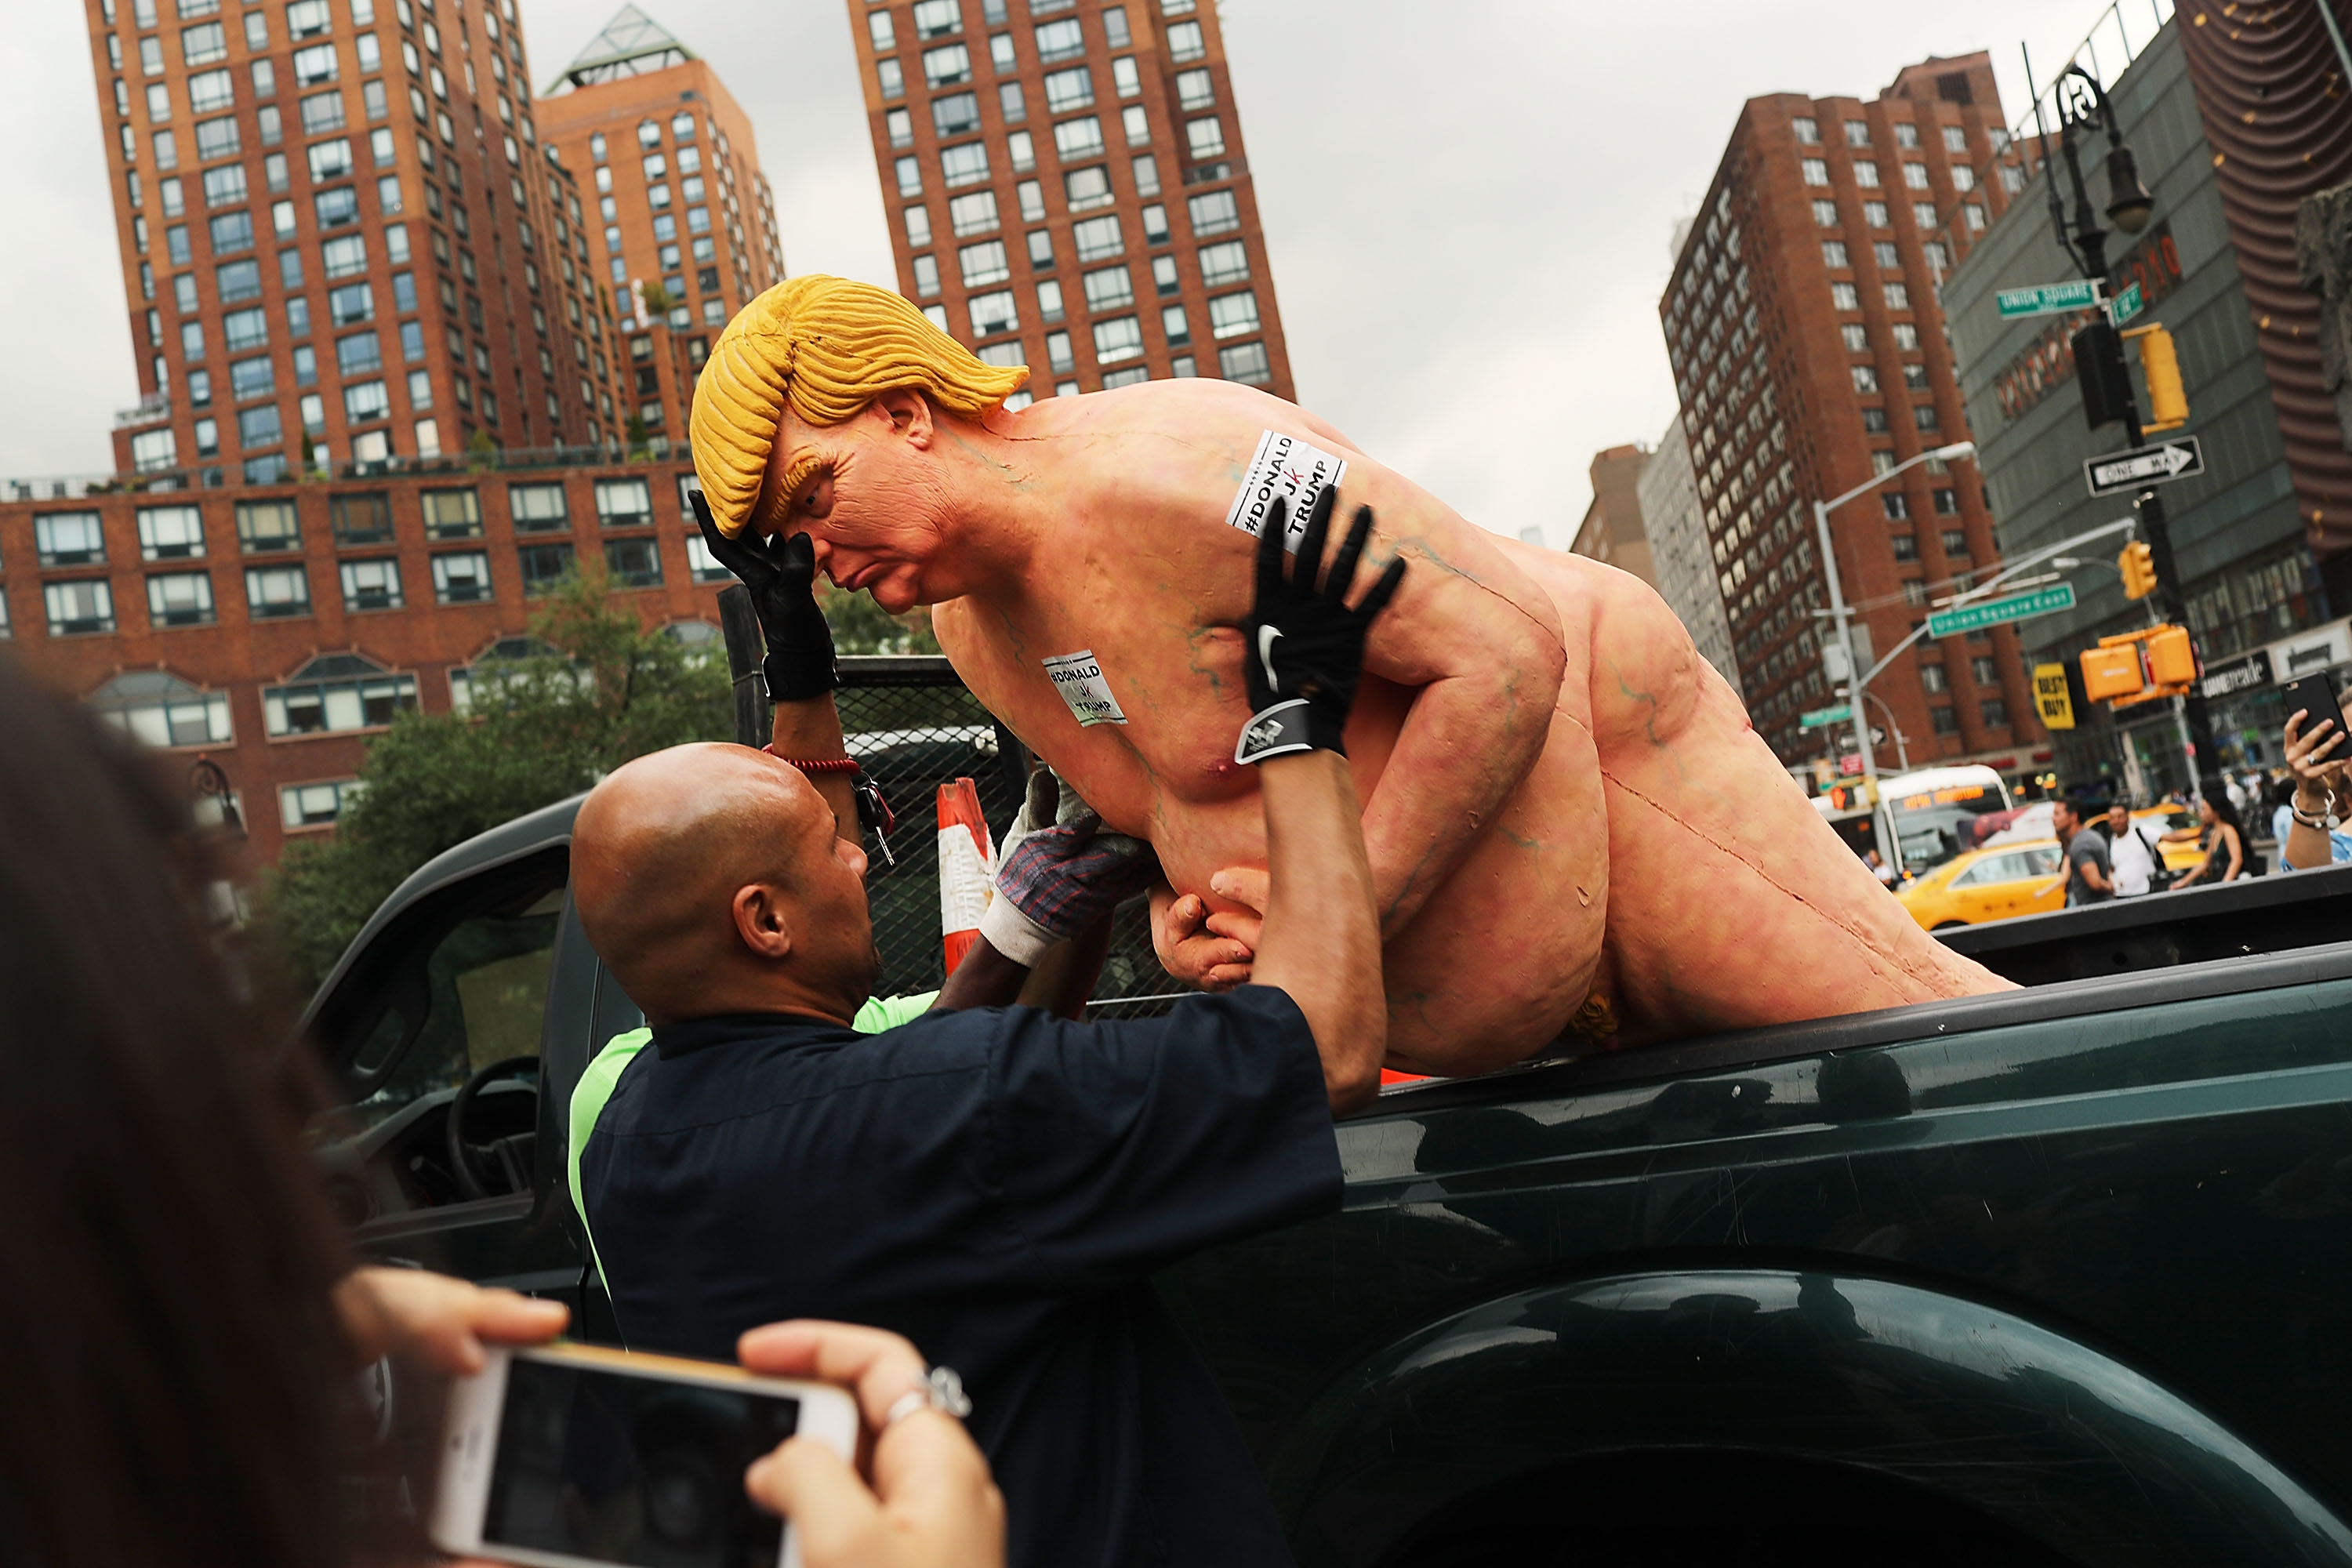 Naked Donald Trump statue appears in Union Square, other 